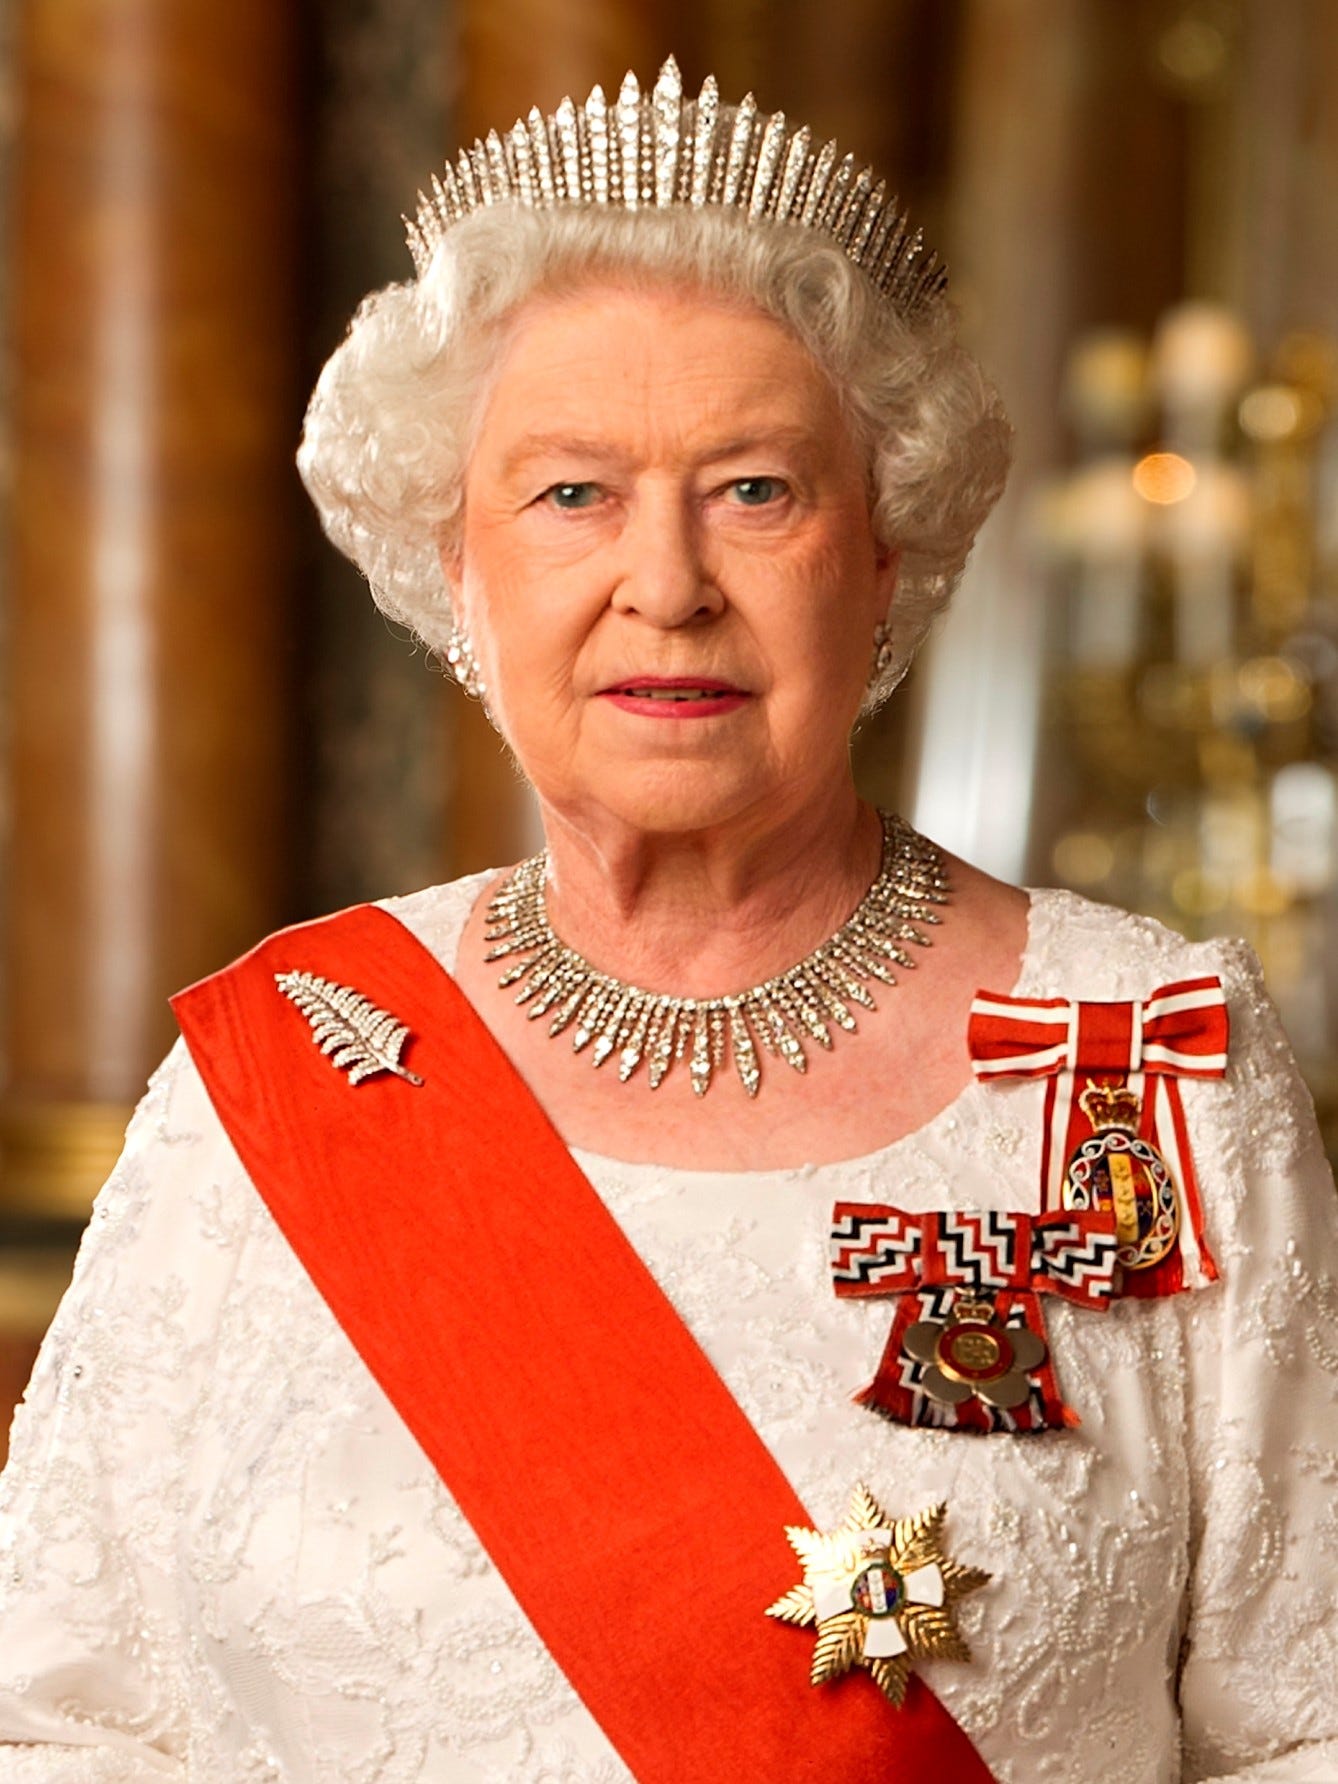 Her Majesty Queen Elizabeth II, Queen of New Zealand, in the Blue Room of Buckingham Palace. She is wearing: a diamond fern brooch given to her in 1953 by the women of Auckland, Queen Mary's Fringe Tiara, the City of London Fringe Necklace, the insignia of the Sovereign of the Order of New Zealand, the badge of the Queen's Service Order, and the sash and star of the New Zealand Order of Merit. One of Queen Mary's Chain-Link Bracelets is on her right wrist. Official portrait taken in 2011 and released on 7 February 2012 to mark the Queen's Diamond Jubilee.